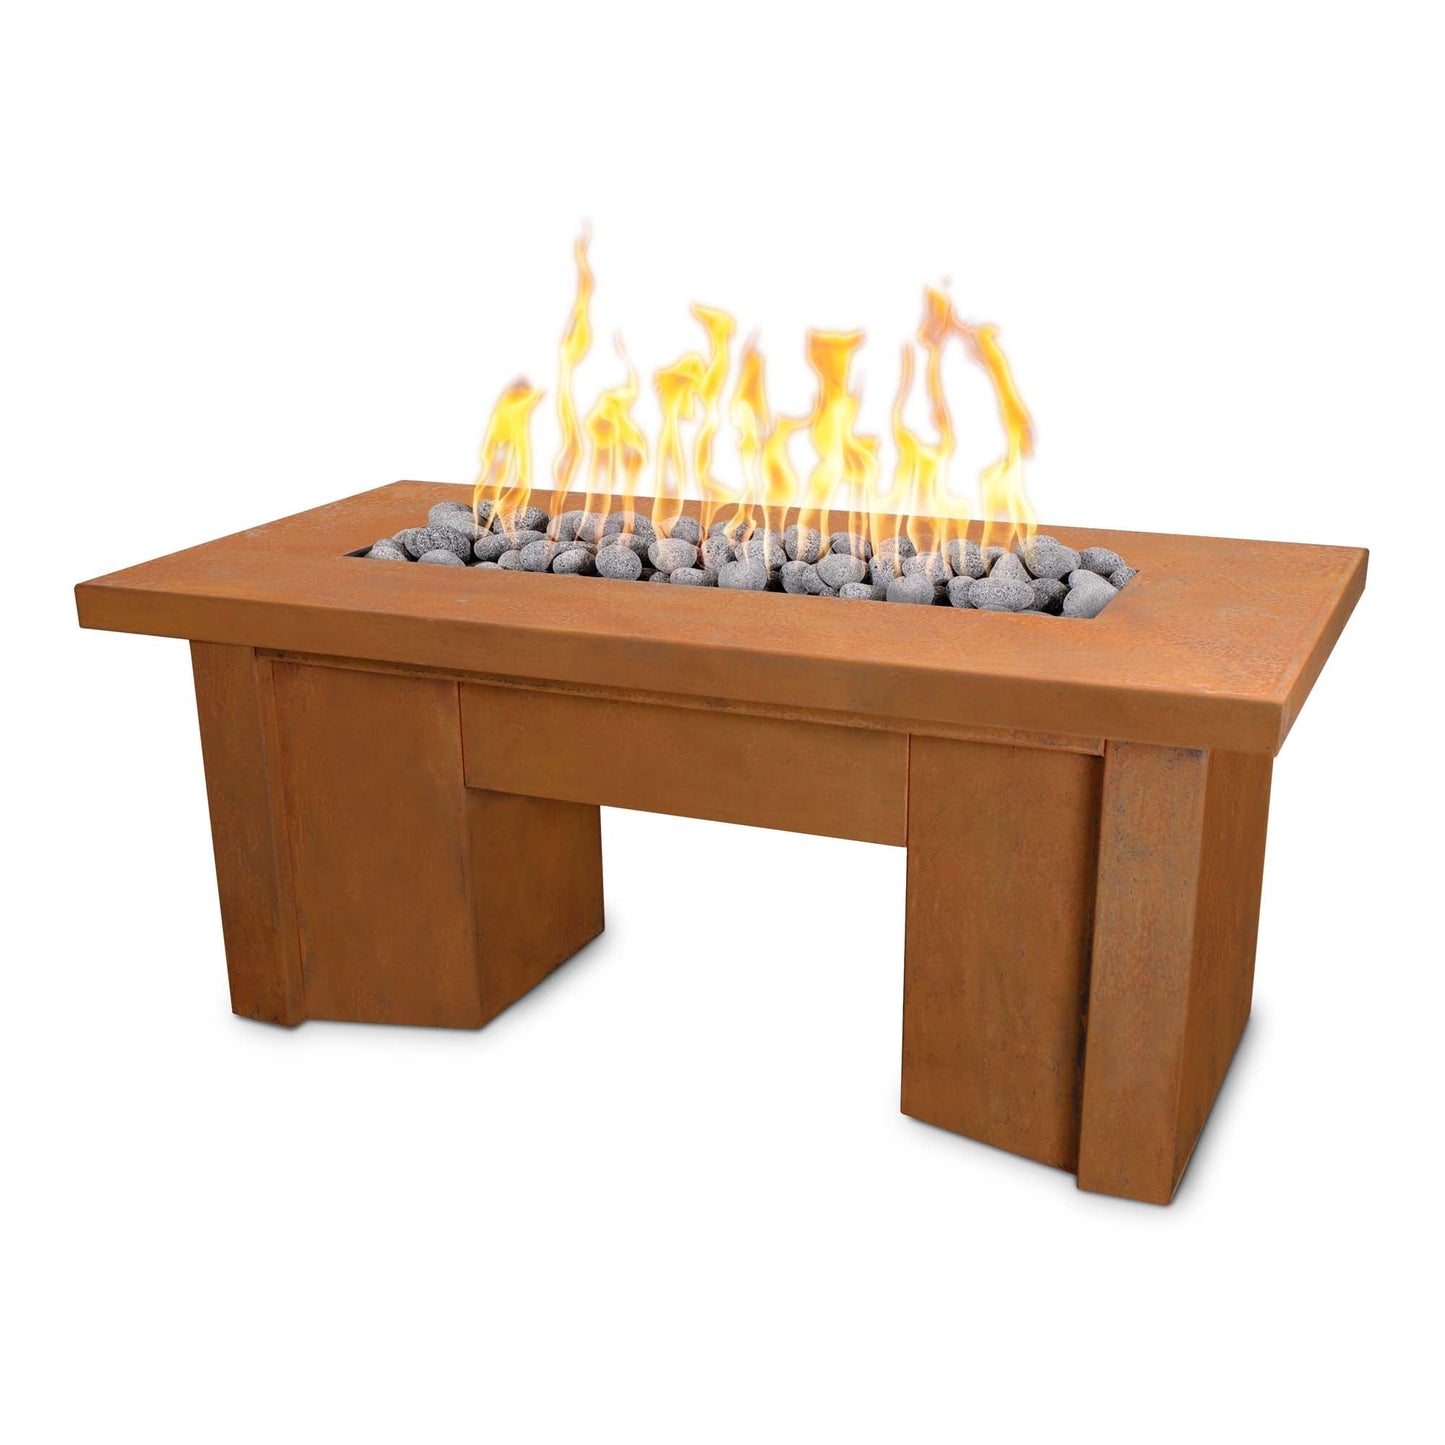 The Outdoor Plus Rectangular Alameda 48" Corten Steel Liquid Propane Fire Pit with 12V Electronic Ignition